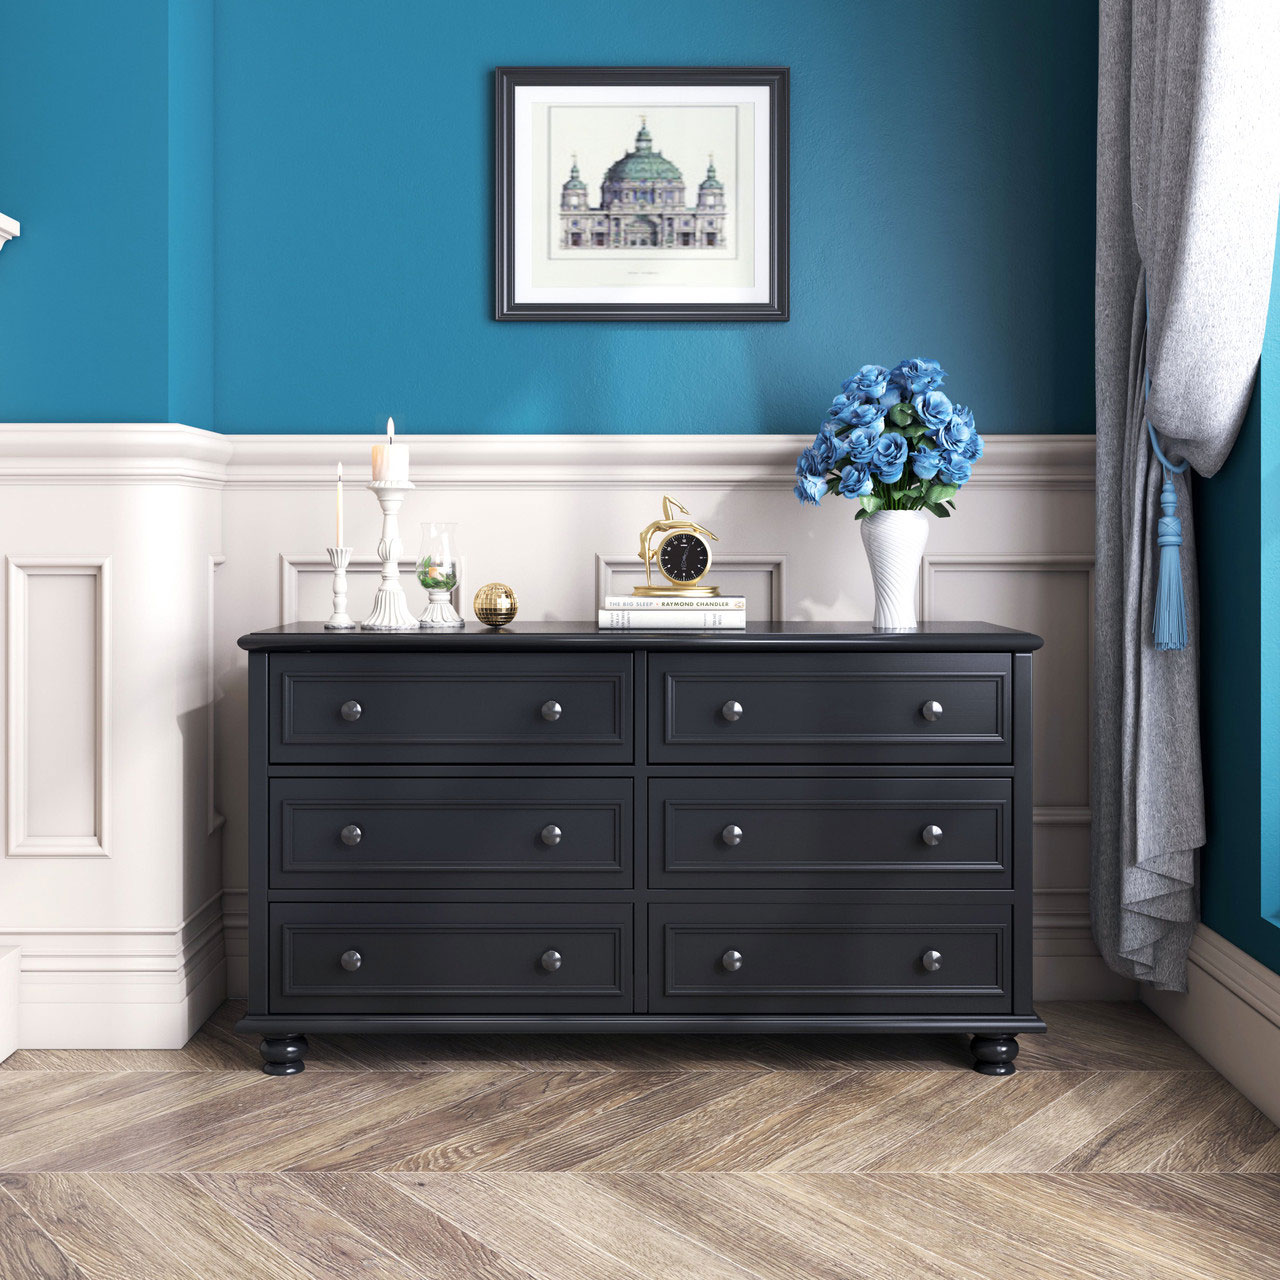 Beata 6 Chest of Drawers in Black Finish CP008B - Hallams Home